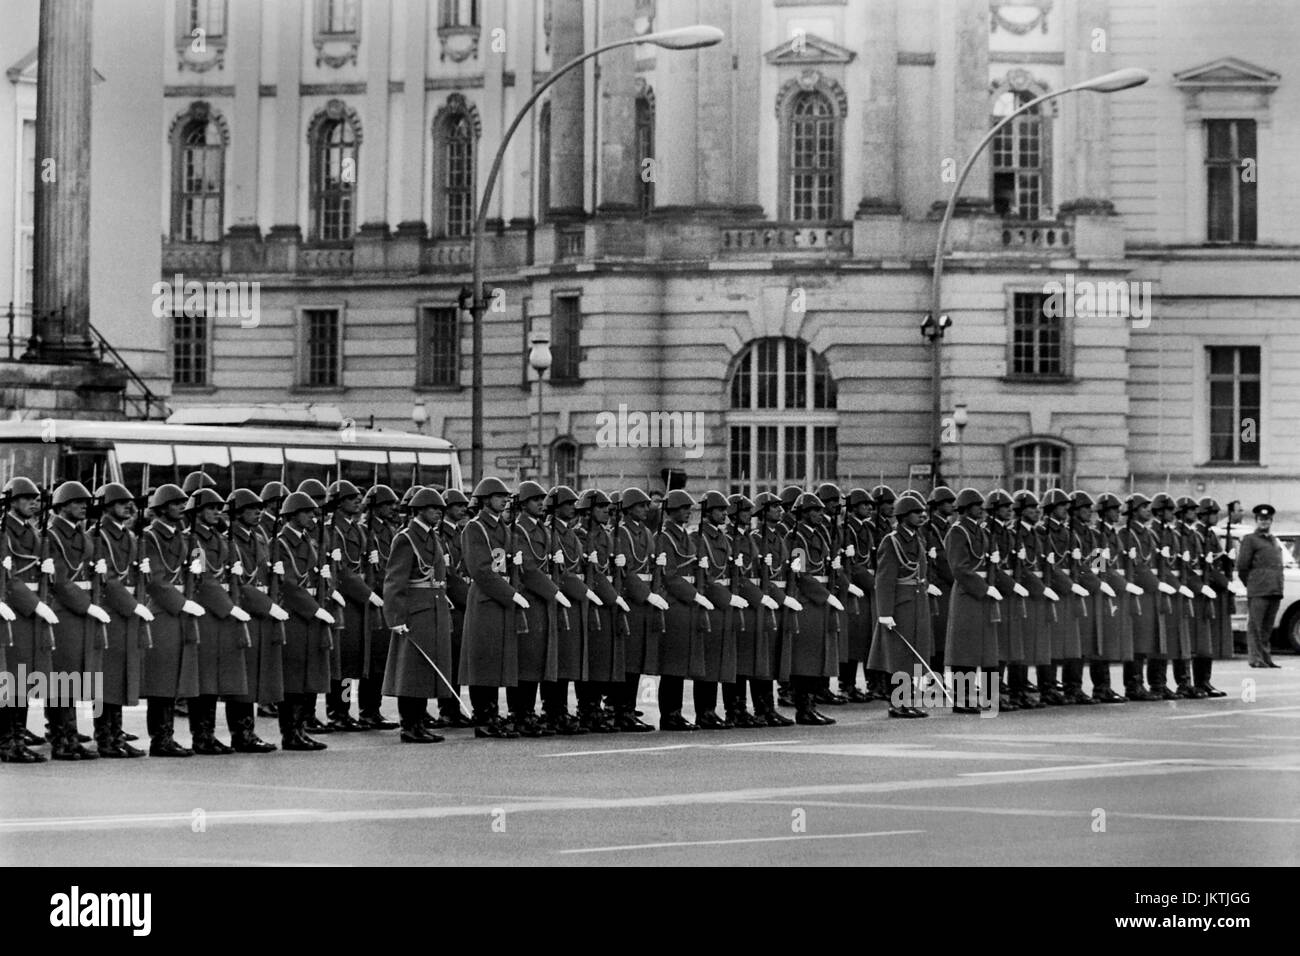 The NVA, National People’s Army of the German democratic Republic, Deutsche Demokratische Republik, changing of the guard ceremony in  Berlin by the Friedrich Engels Guard Regiment. It was the NVA's last official Great Wachaufzug or Neue Wache on Berlin’s Unter den Linden boulevard,  November 15th1989, just six days after the fall of the Berlin wall on November 9th. The GDR ended three weeks later. Divided Cities. Stock Photo